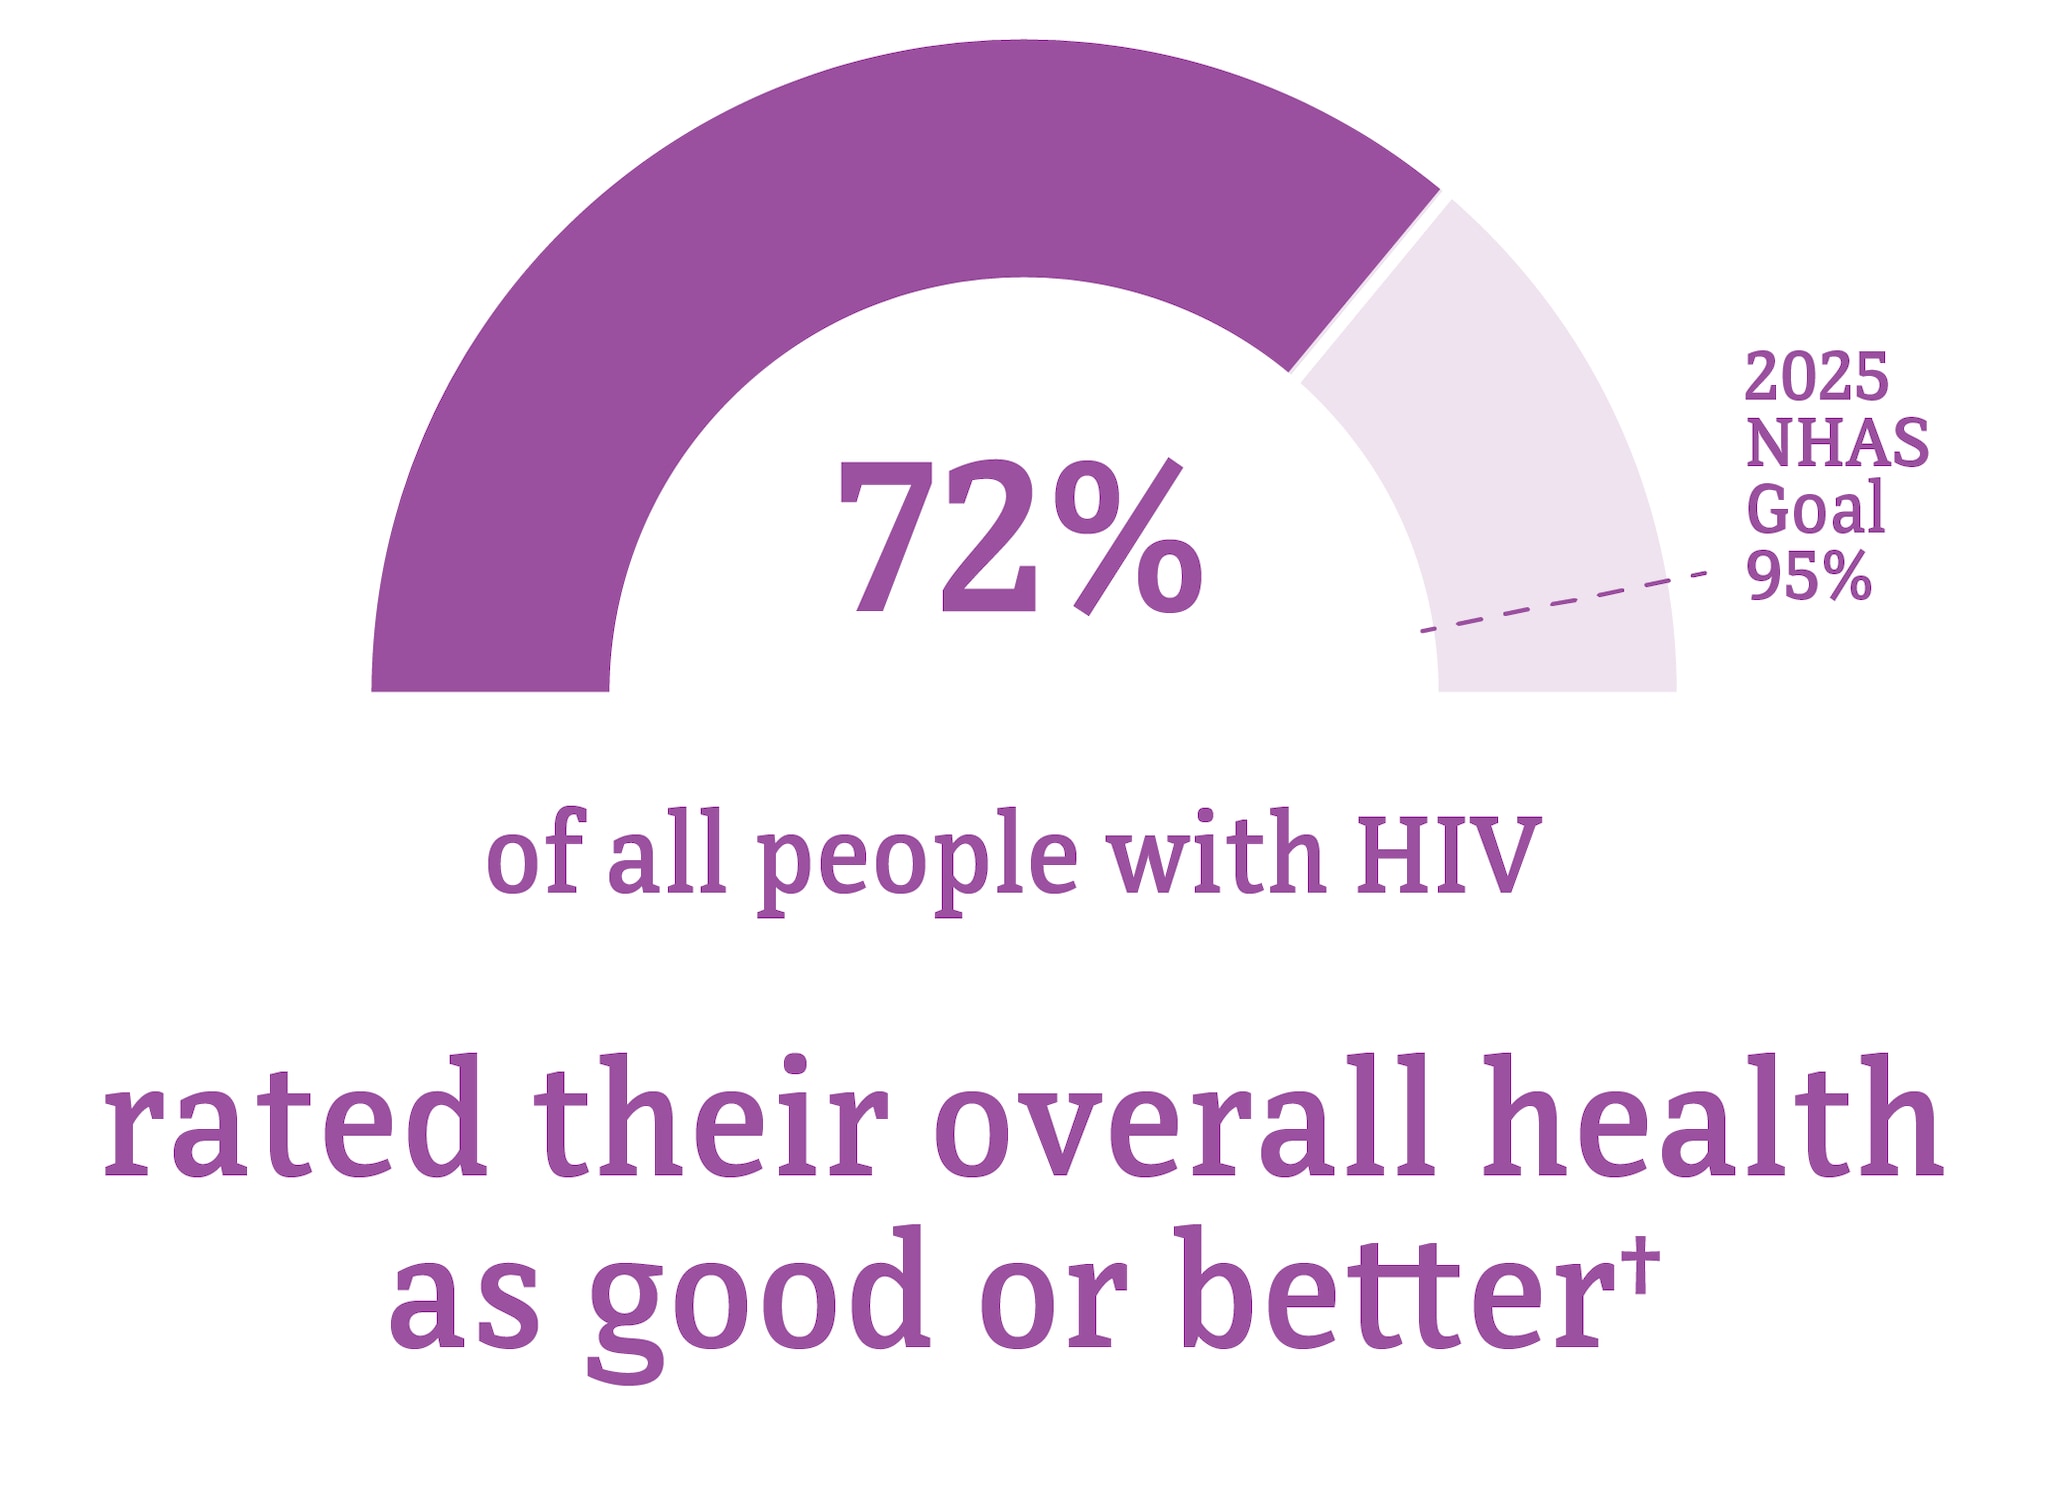 This chart shows the percentage of people with HIV who rated their overall health as good or better.